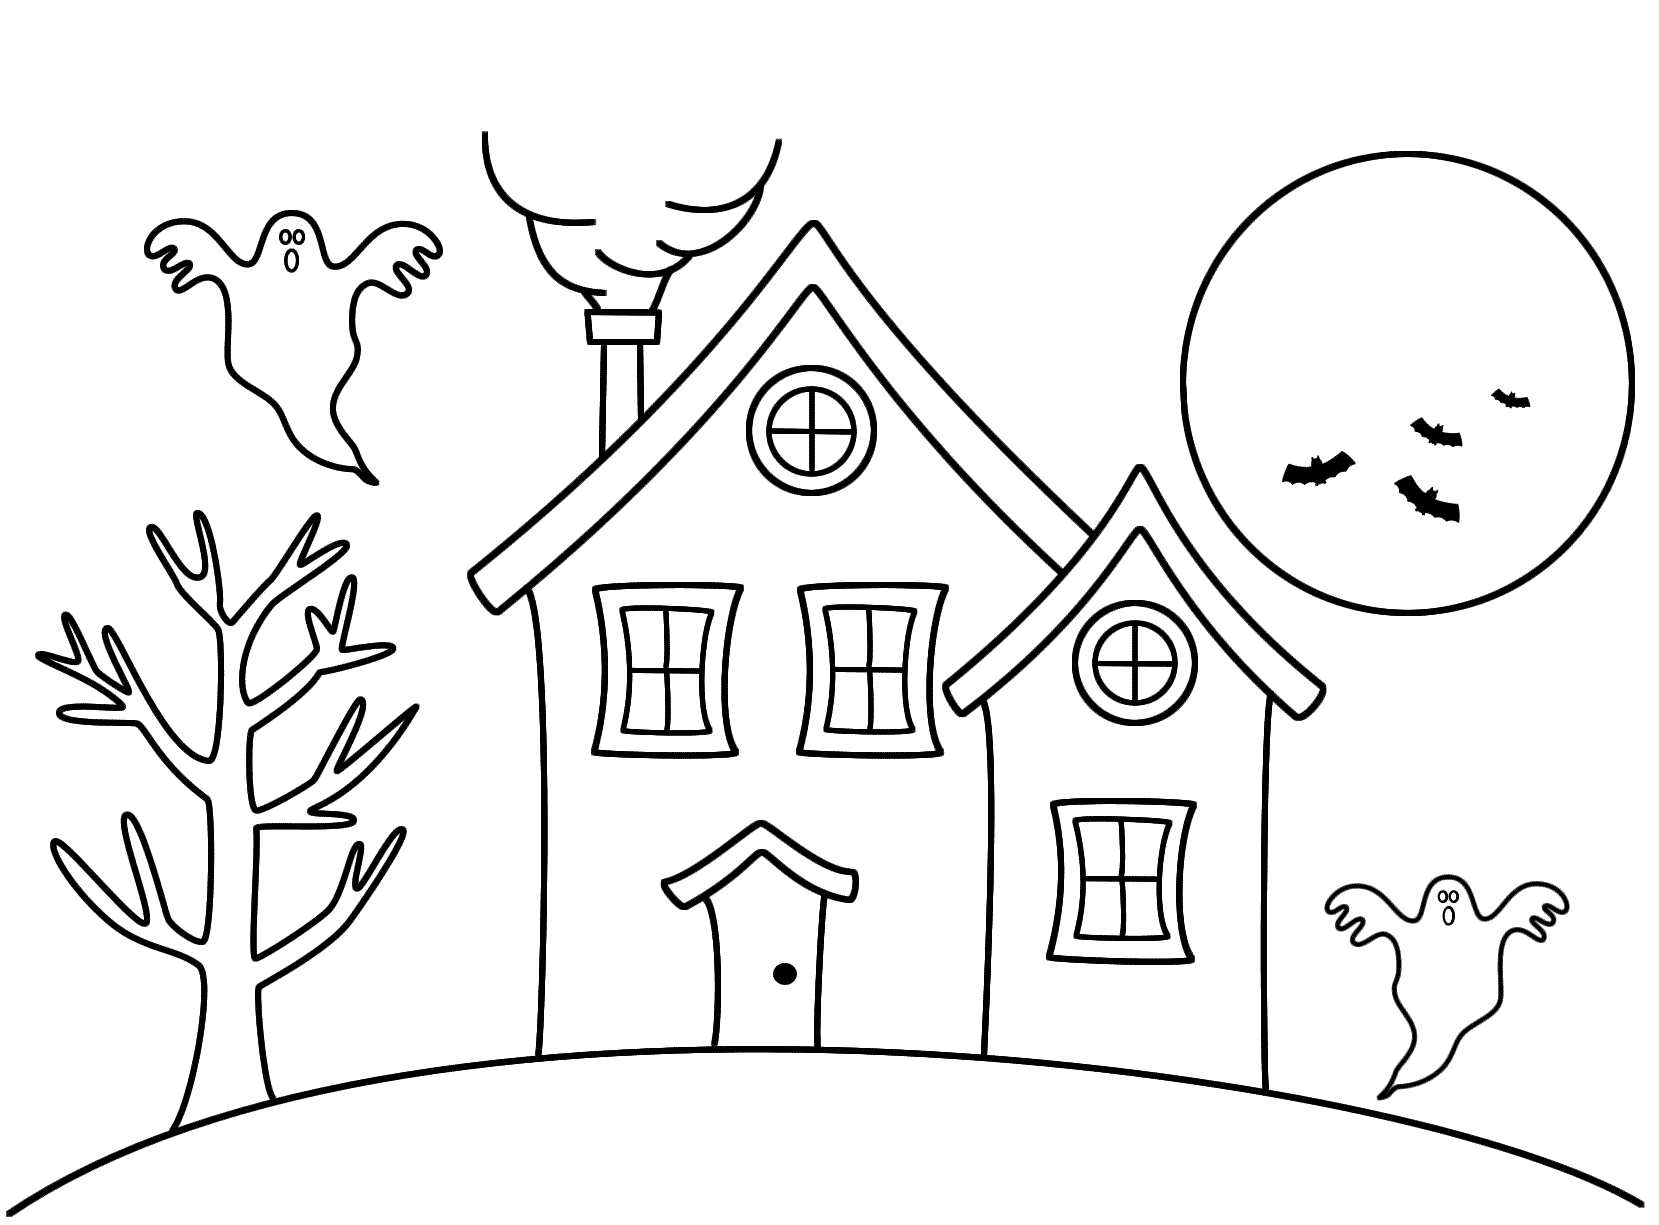 Haunted House Cartoon Drawing at GetDrawings.com | Free for personal